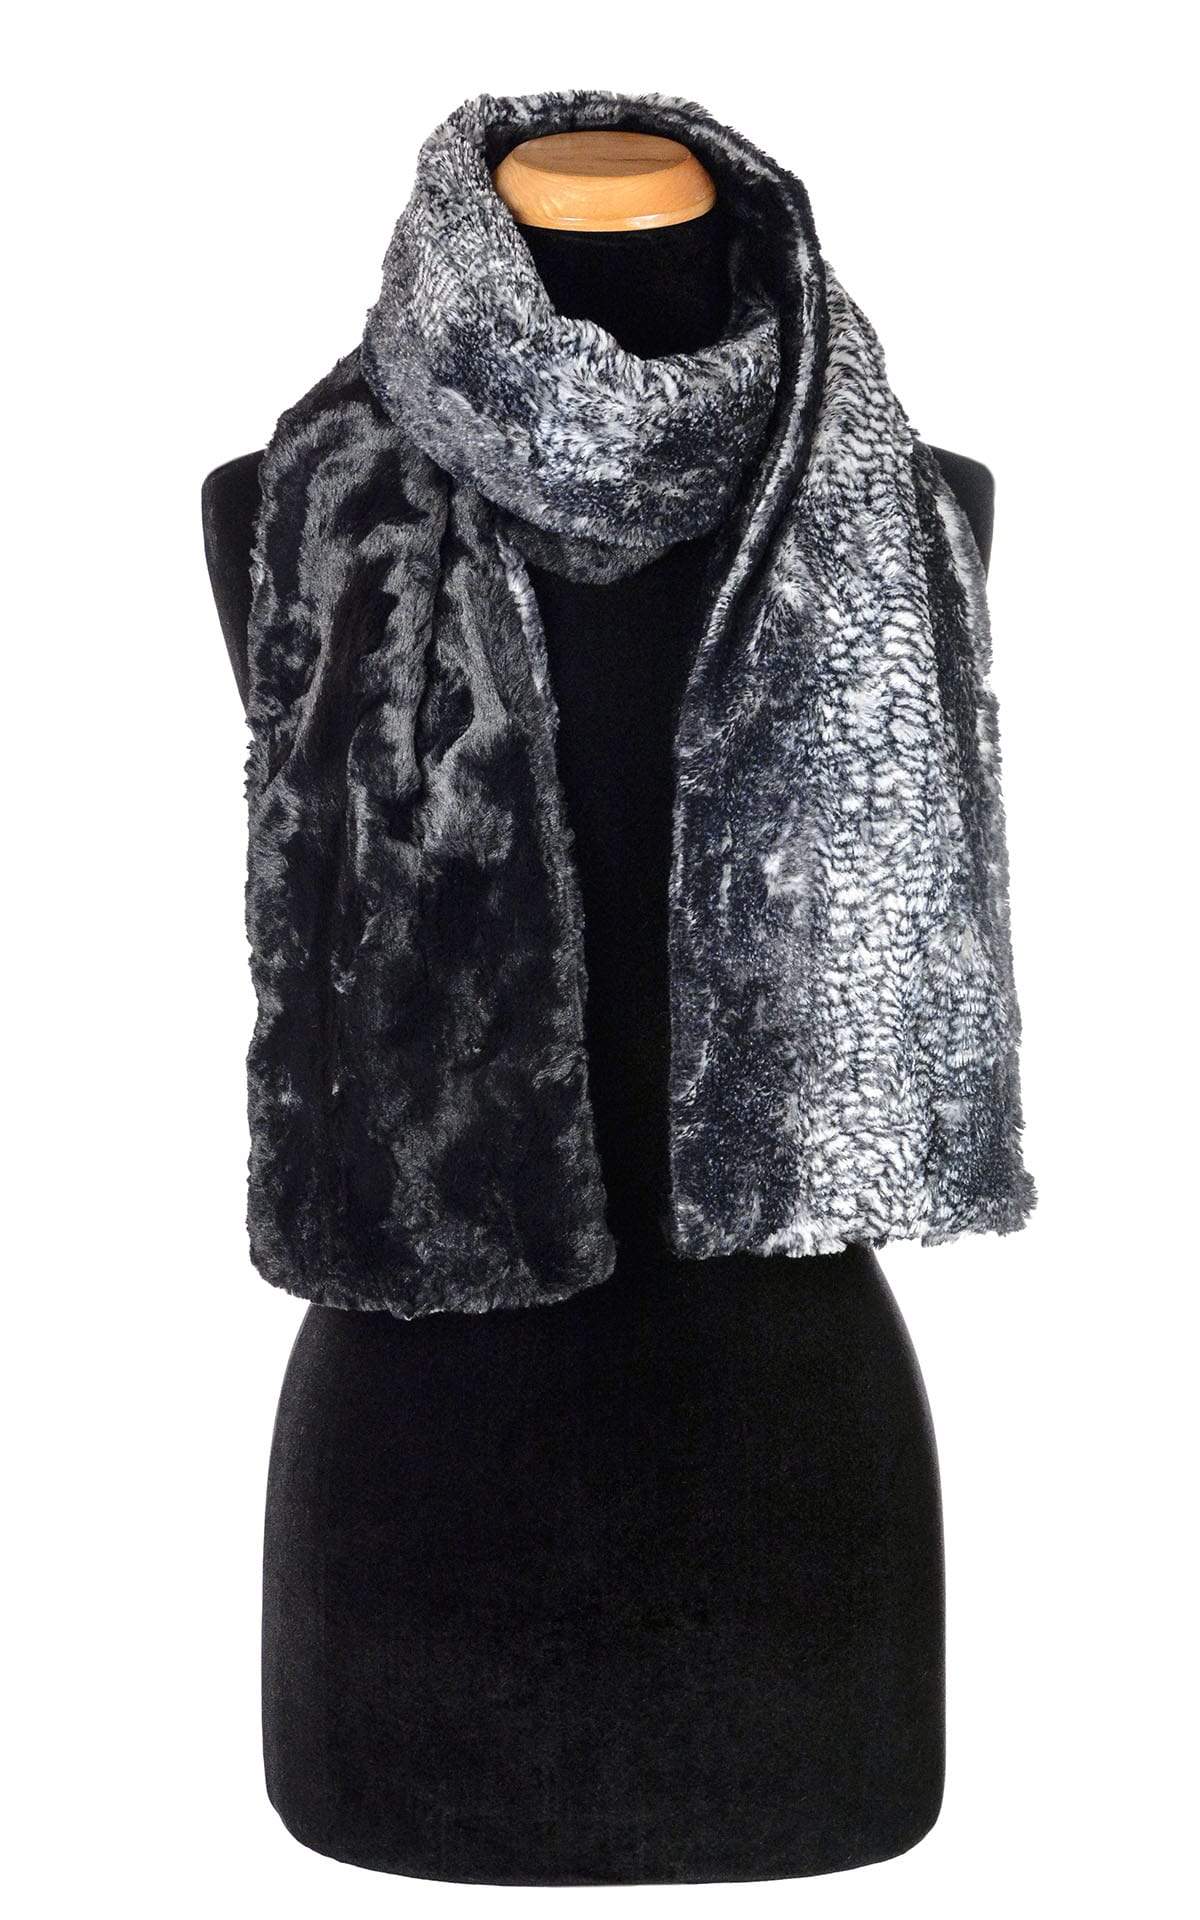 Women’s Product shot on mannequin of two-tone Classic Scarf | Black Mamba animal snake print with Cuddly Black Faux Fur | Handmade by Pandemonium Millinery Seattle, WA USA